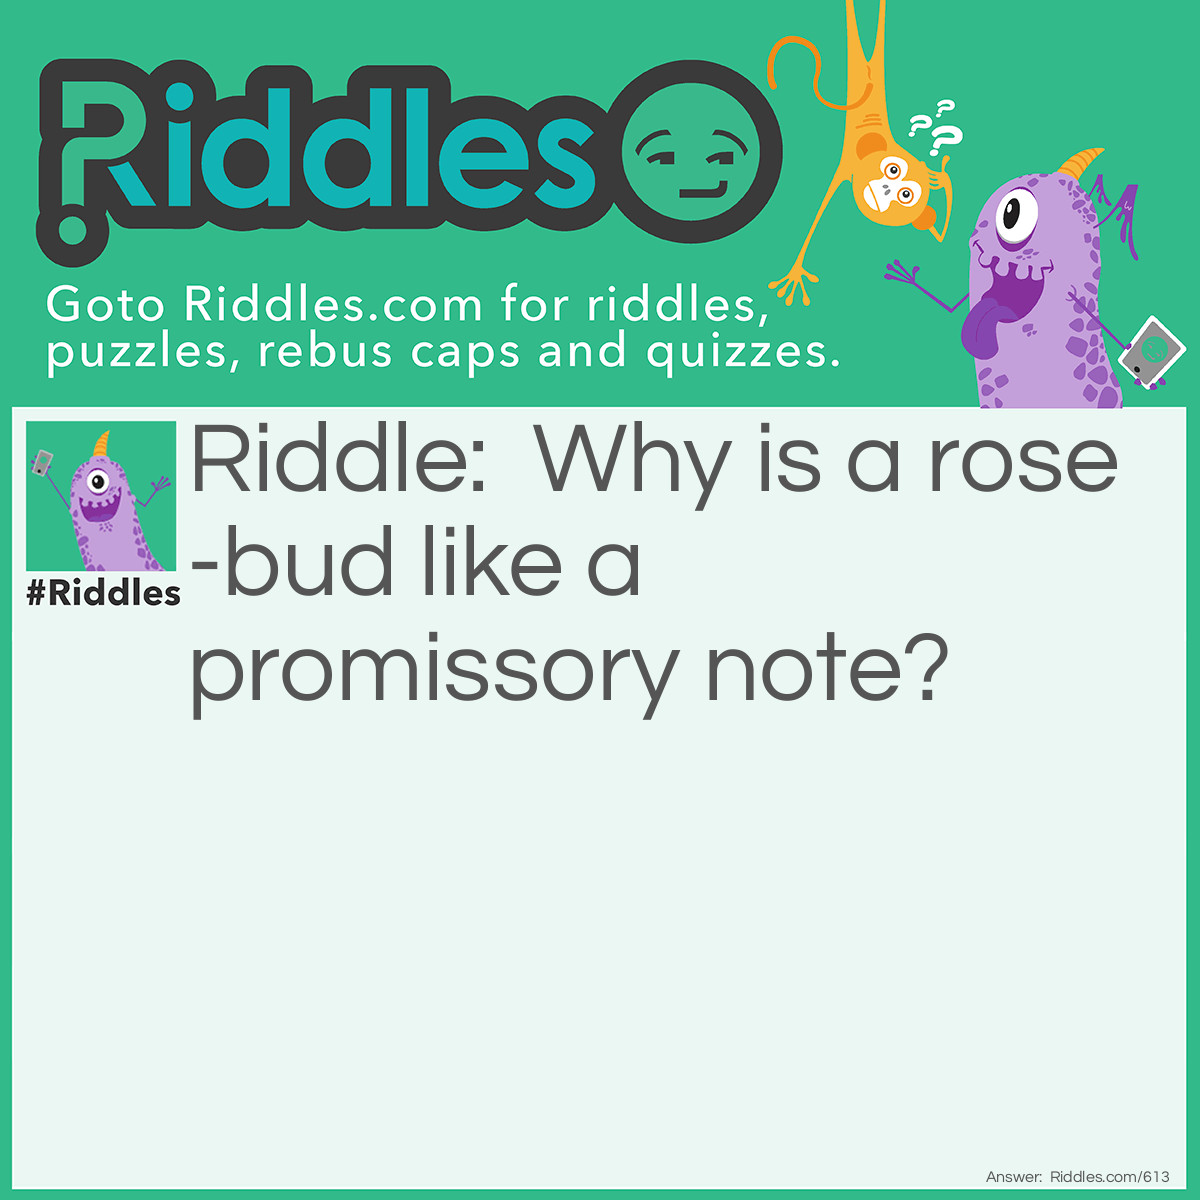 Riddle: Why is a rose-bud like a promissory note? Answer: It matures by falling dew.